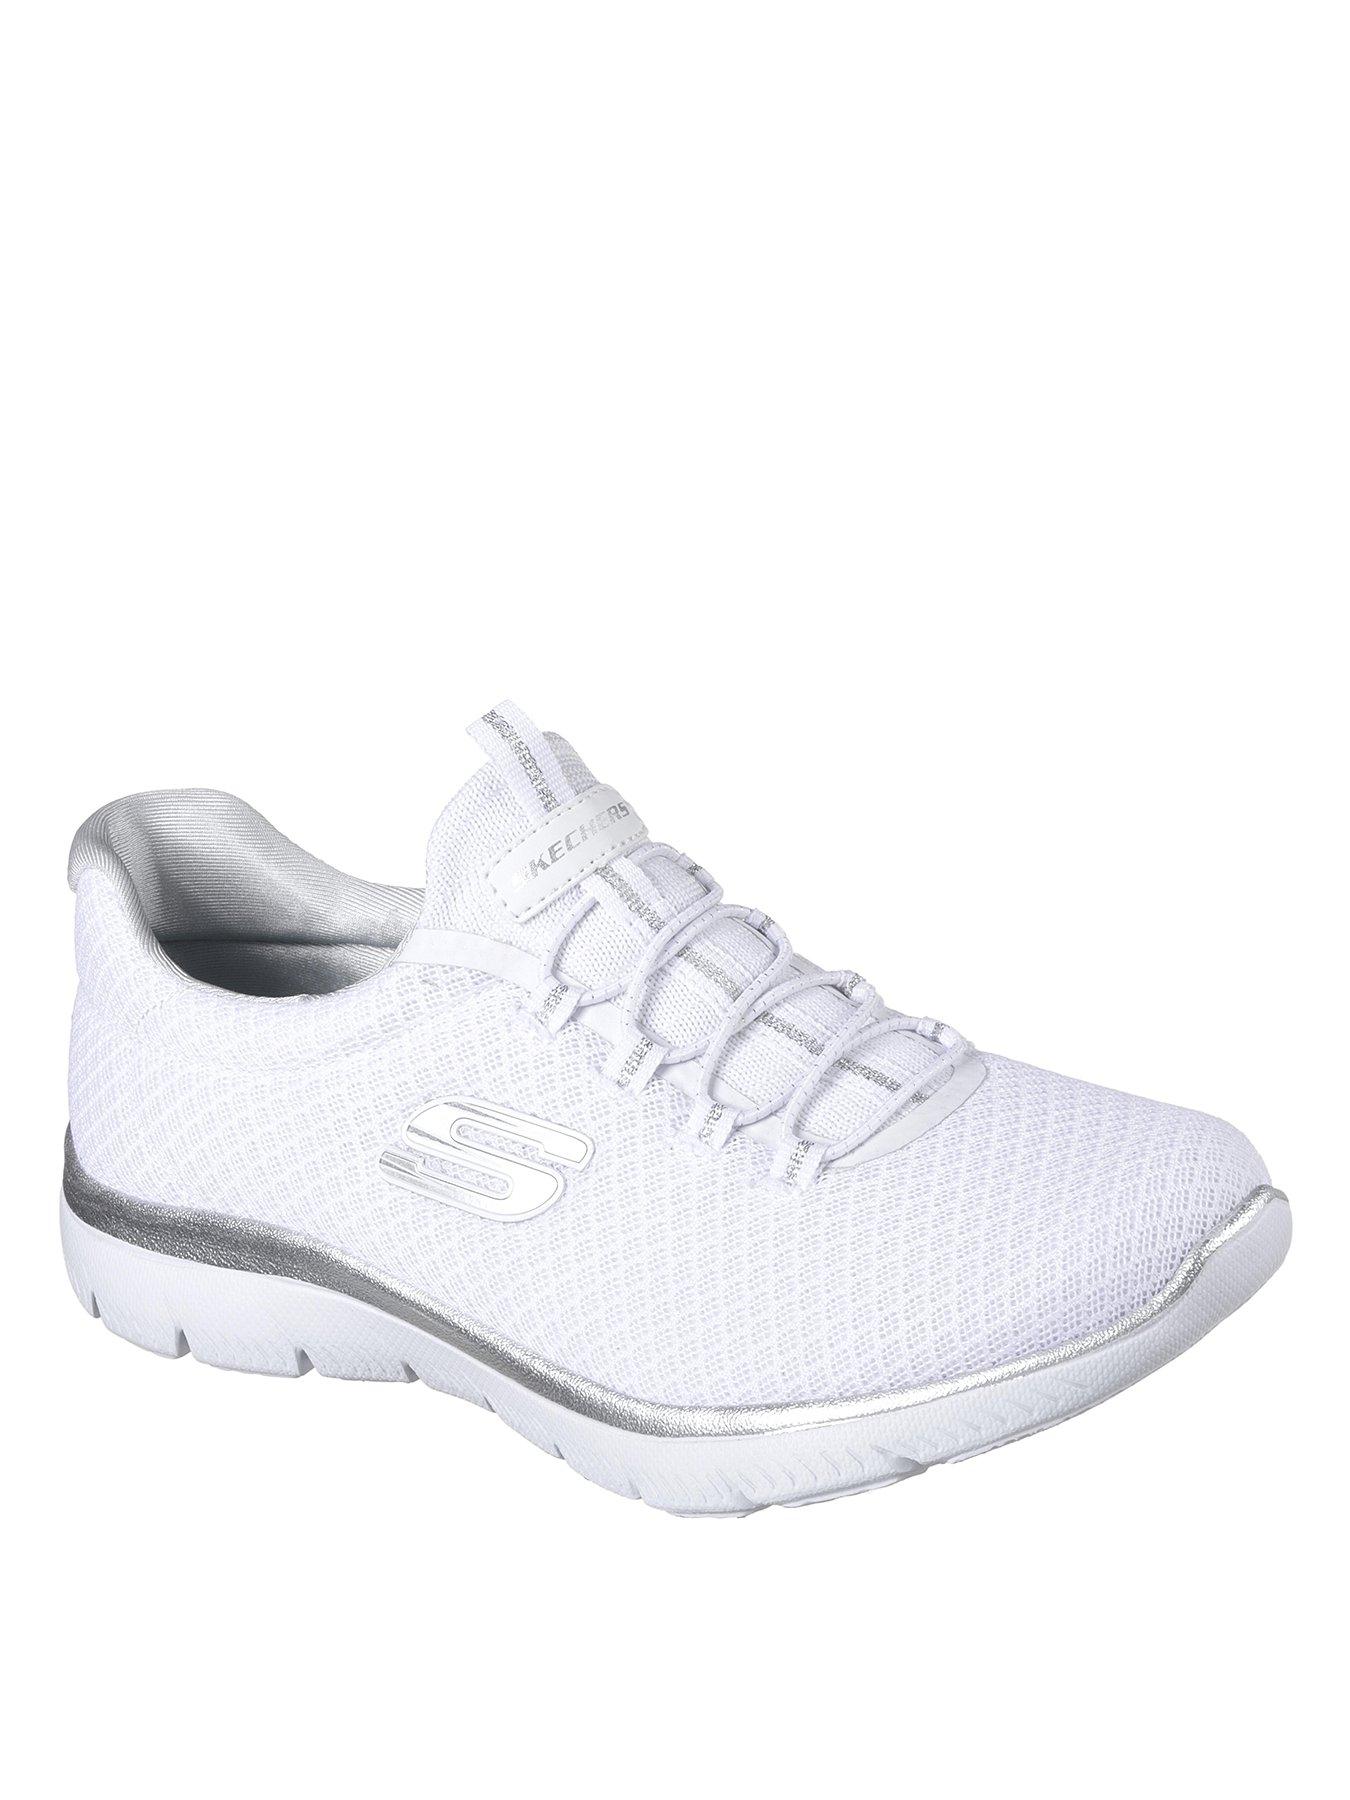 skechers wide fit trainers uk